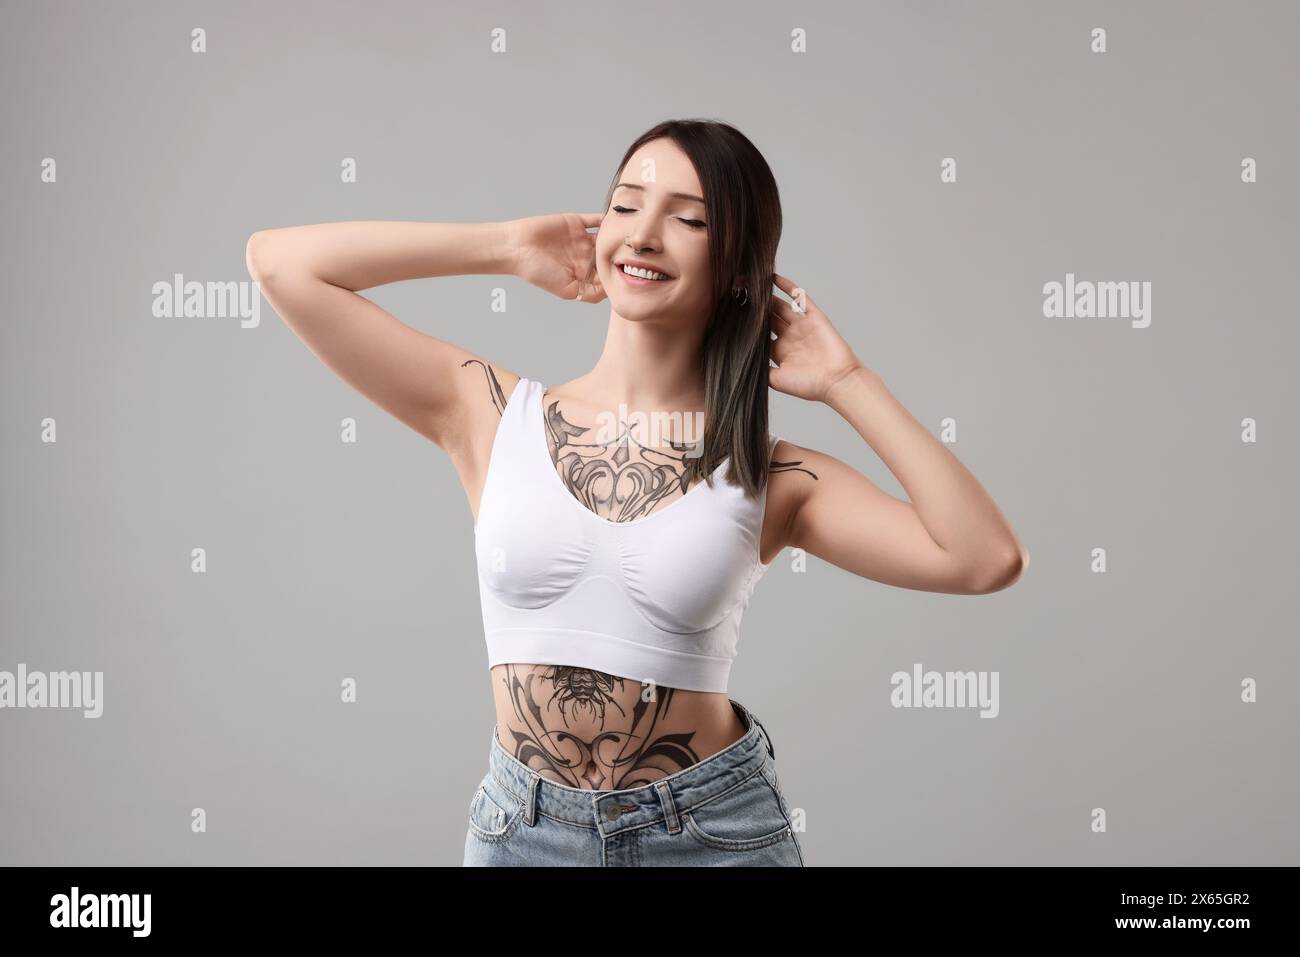 Portrait of smiling tattooed woman on grey background Stock Photo